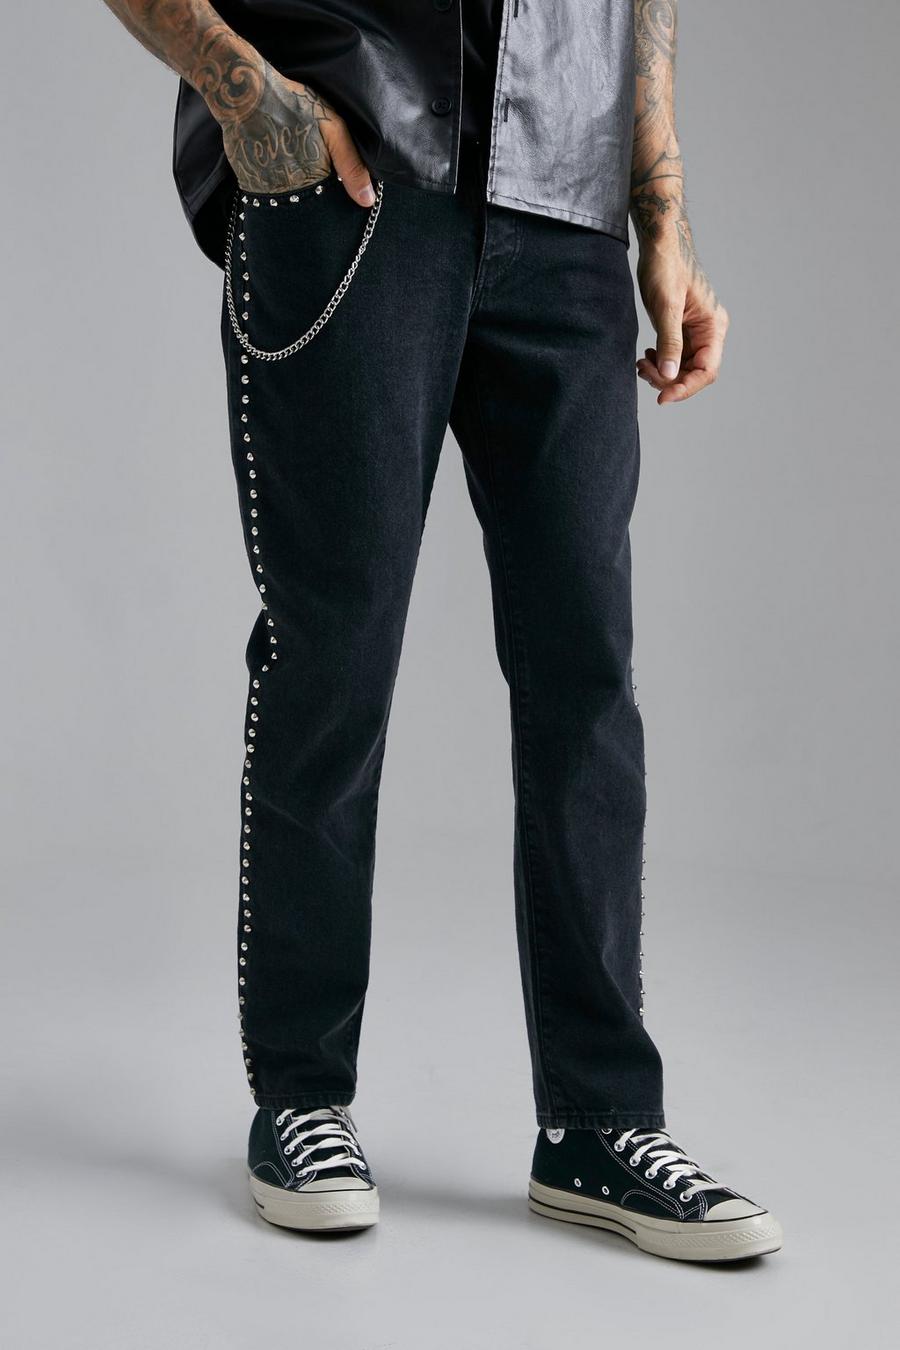 Washed black Straight Leg Stud Detail Jeans With Chain